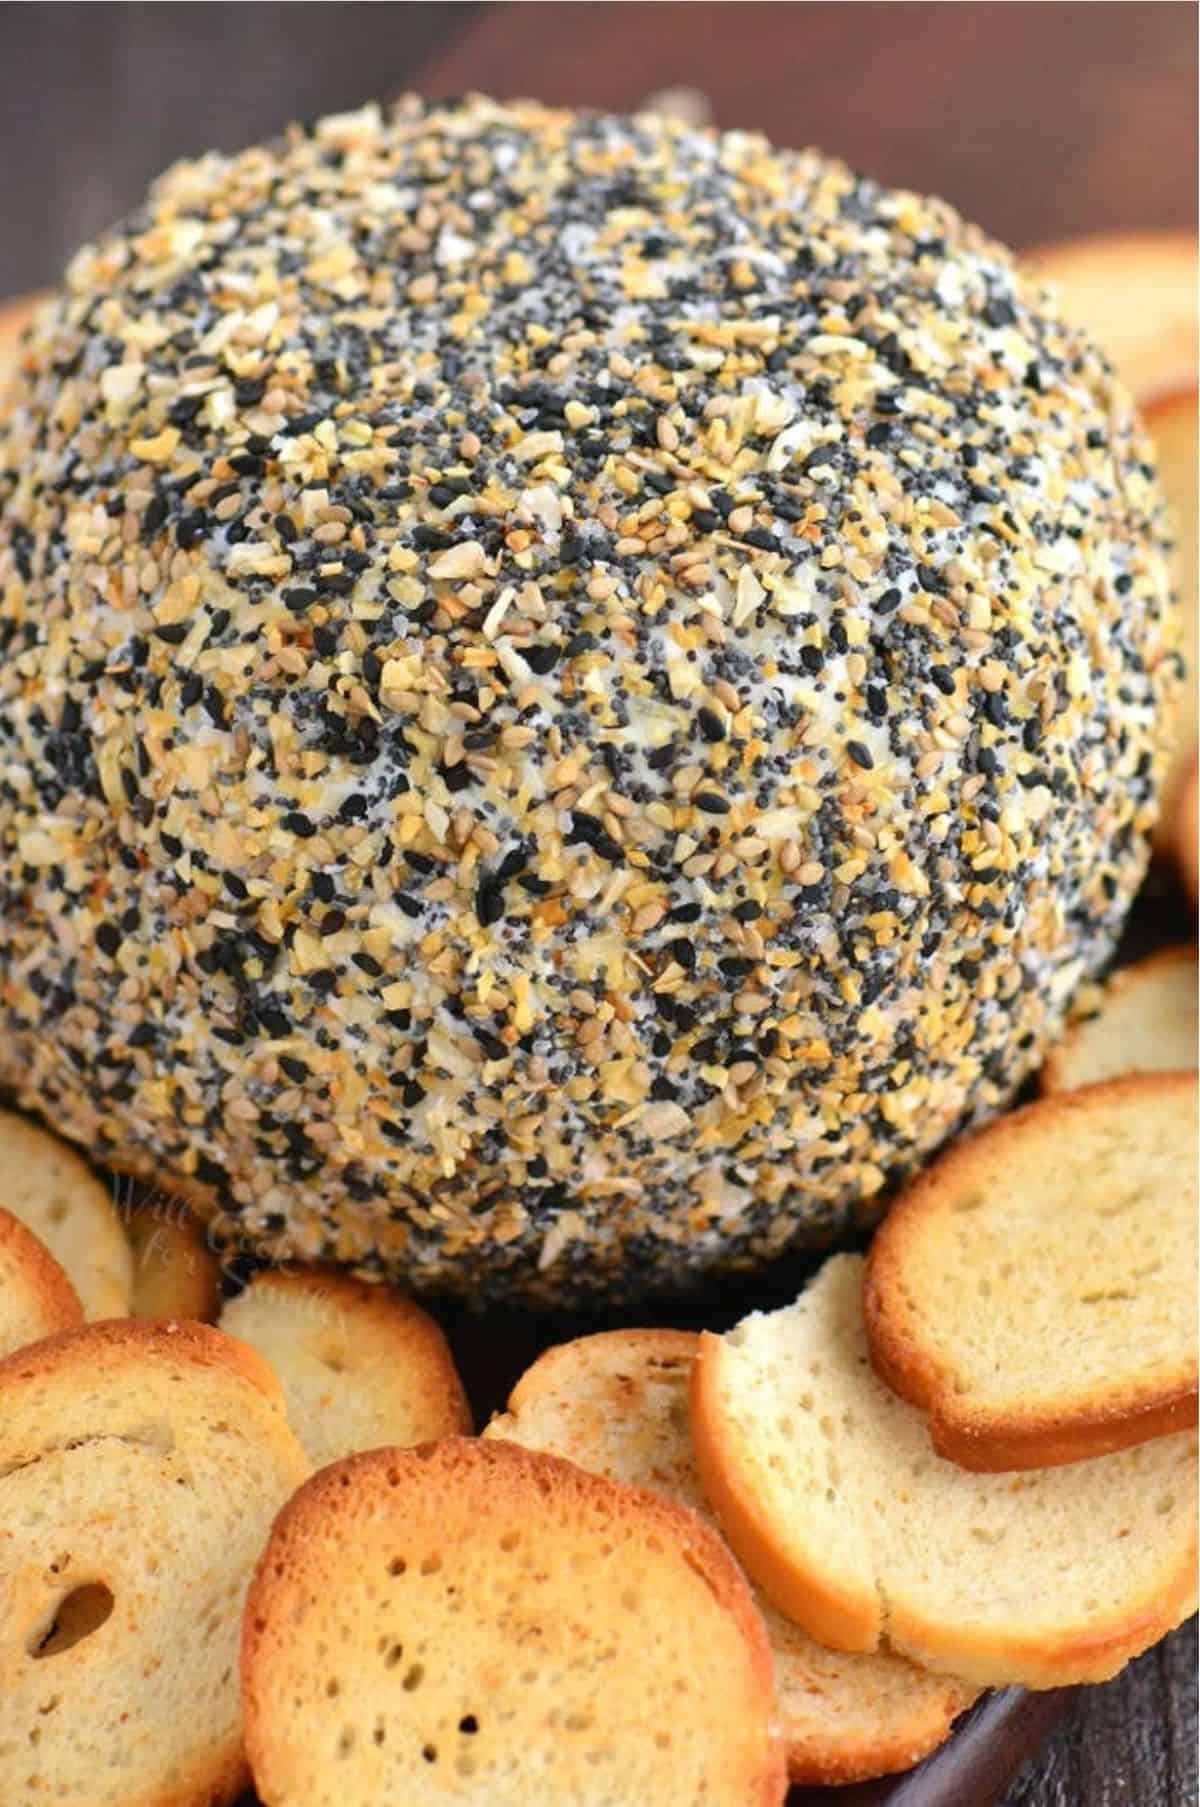 everything bagel seasoning coated cheese ball with some crispy bread.